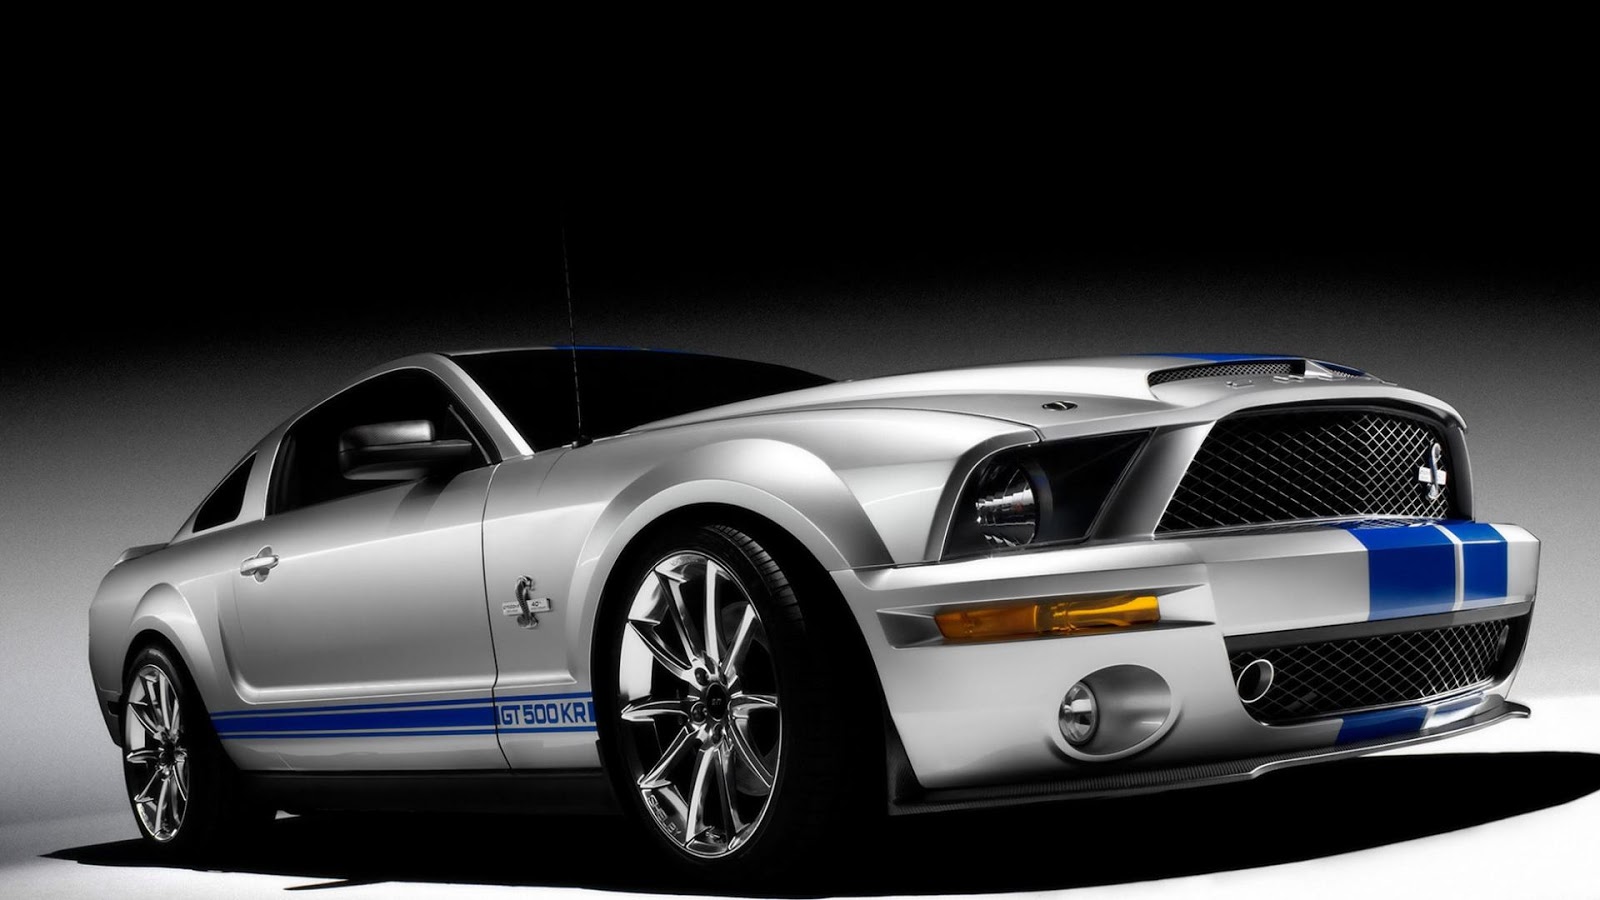 best car wallpapers hd,land vehicle,vehicle,car,shelby mustang,motor vehicle